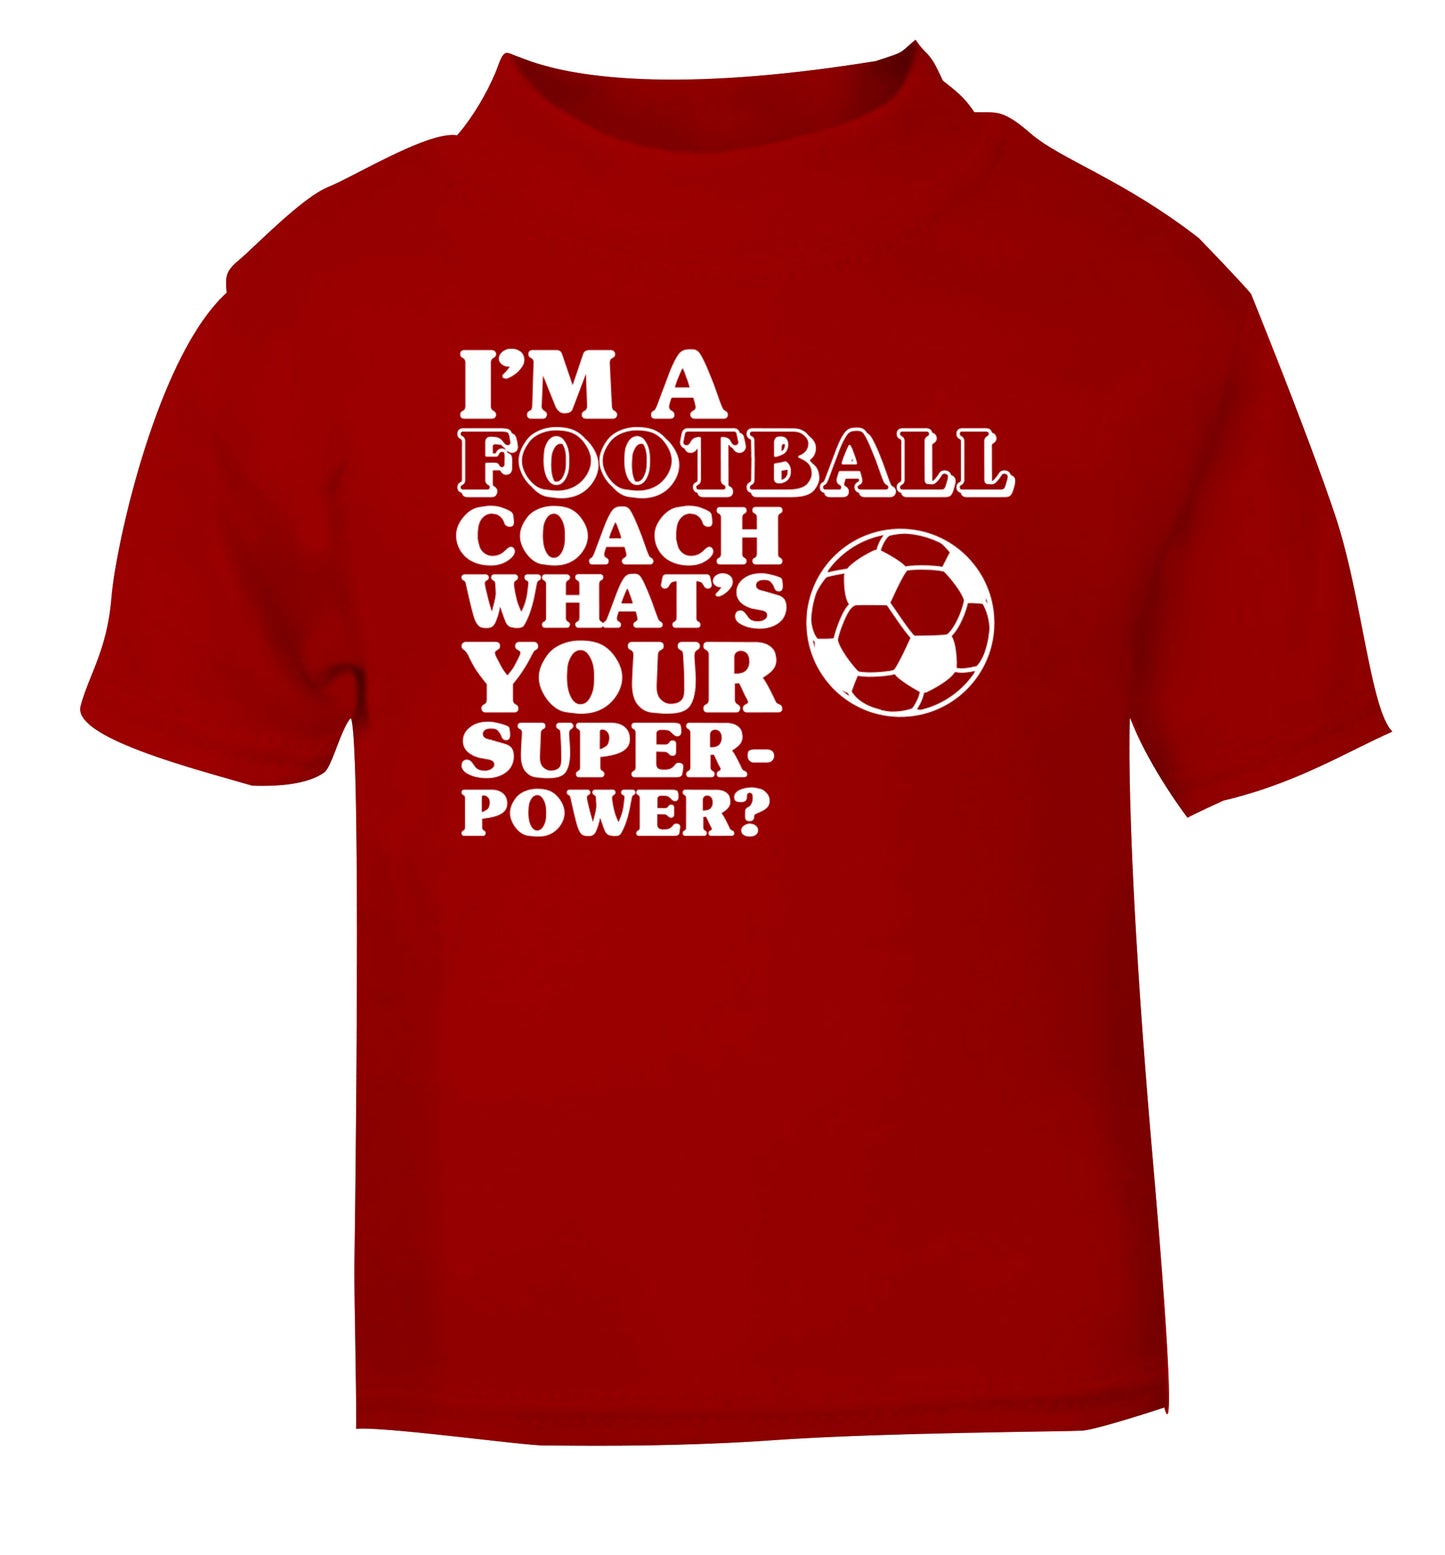 I'm a football coach what's your superpower? red Baby Toddler Tshirt 2 Years